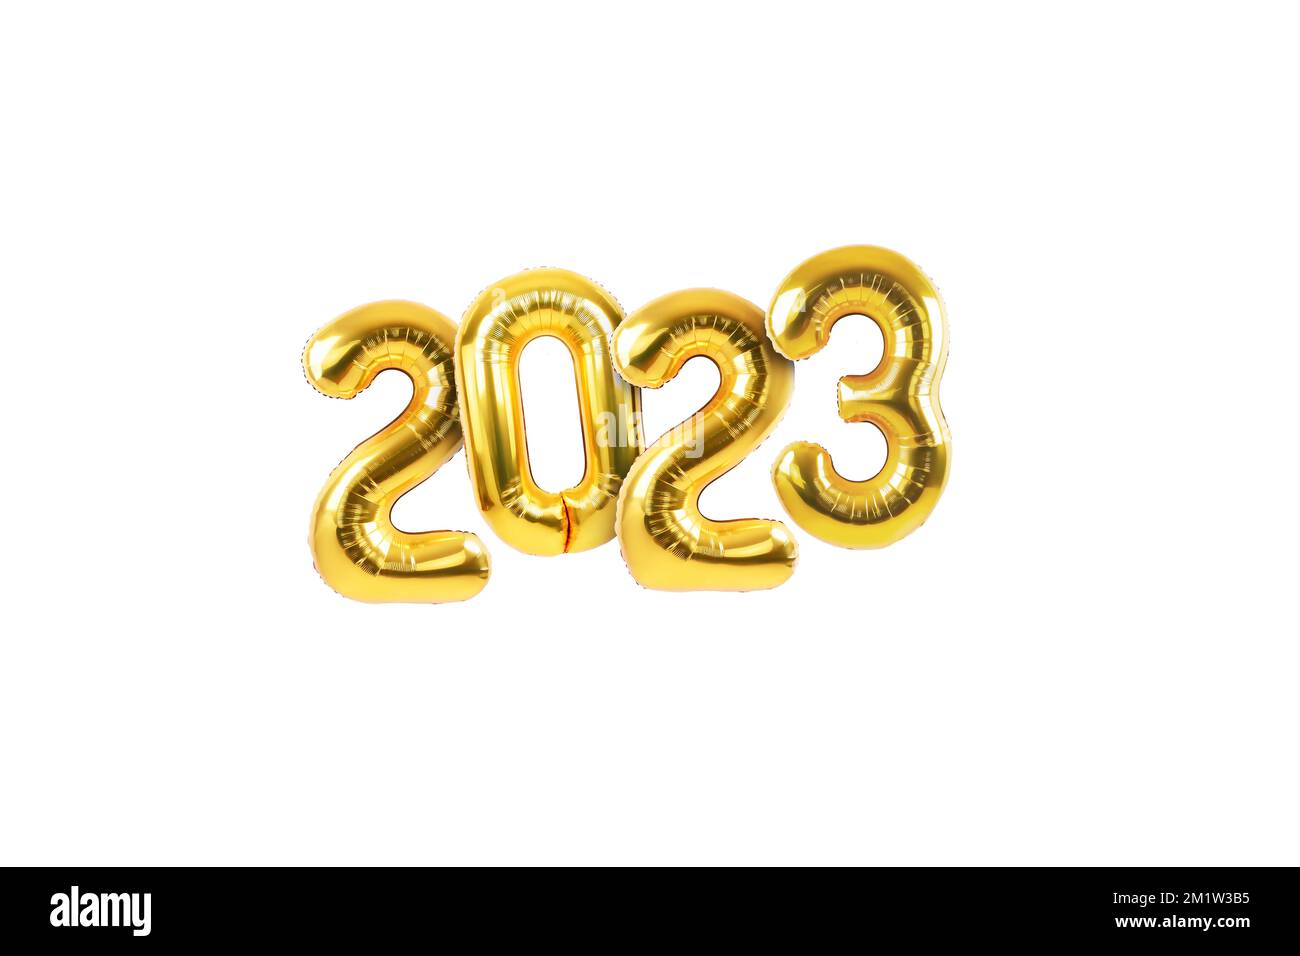 Happy new year 2023 metallic gold foil balloons on a white background. Golden helium balloons number 2023 New Year. Stock Photo